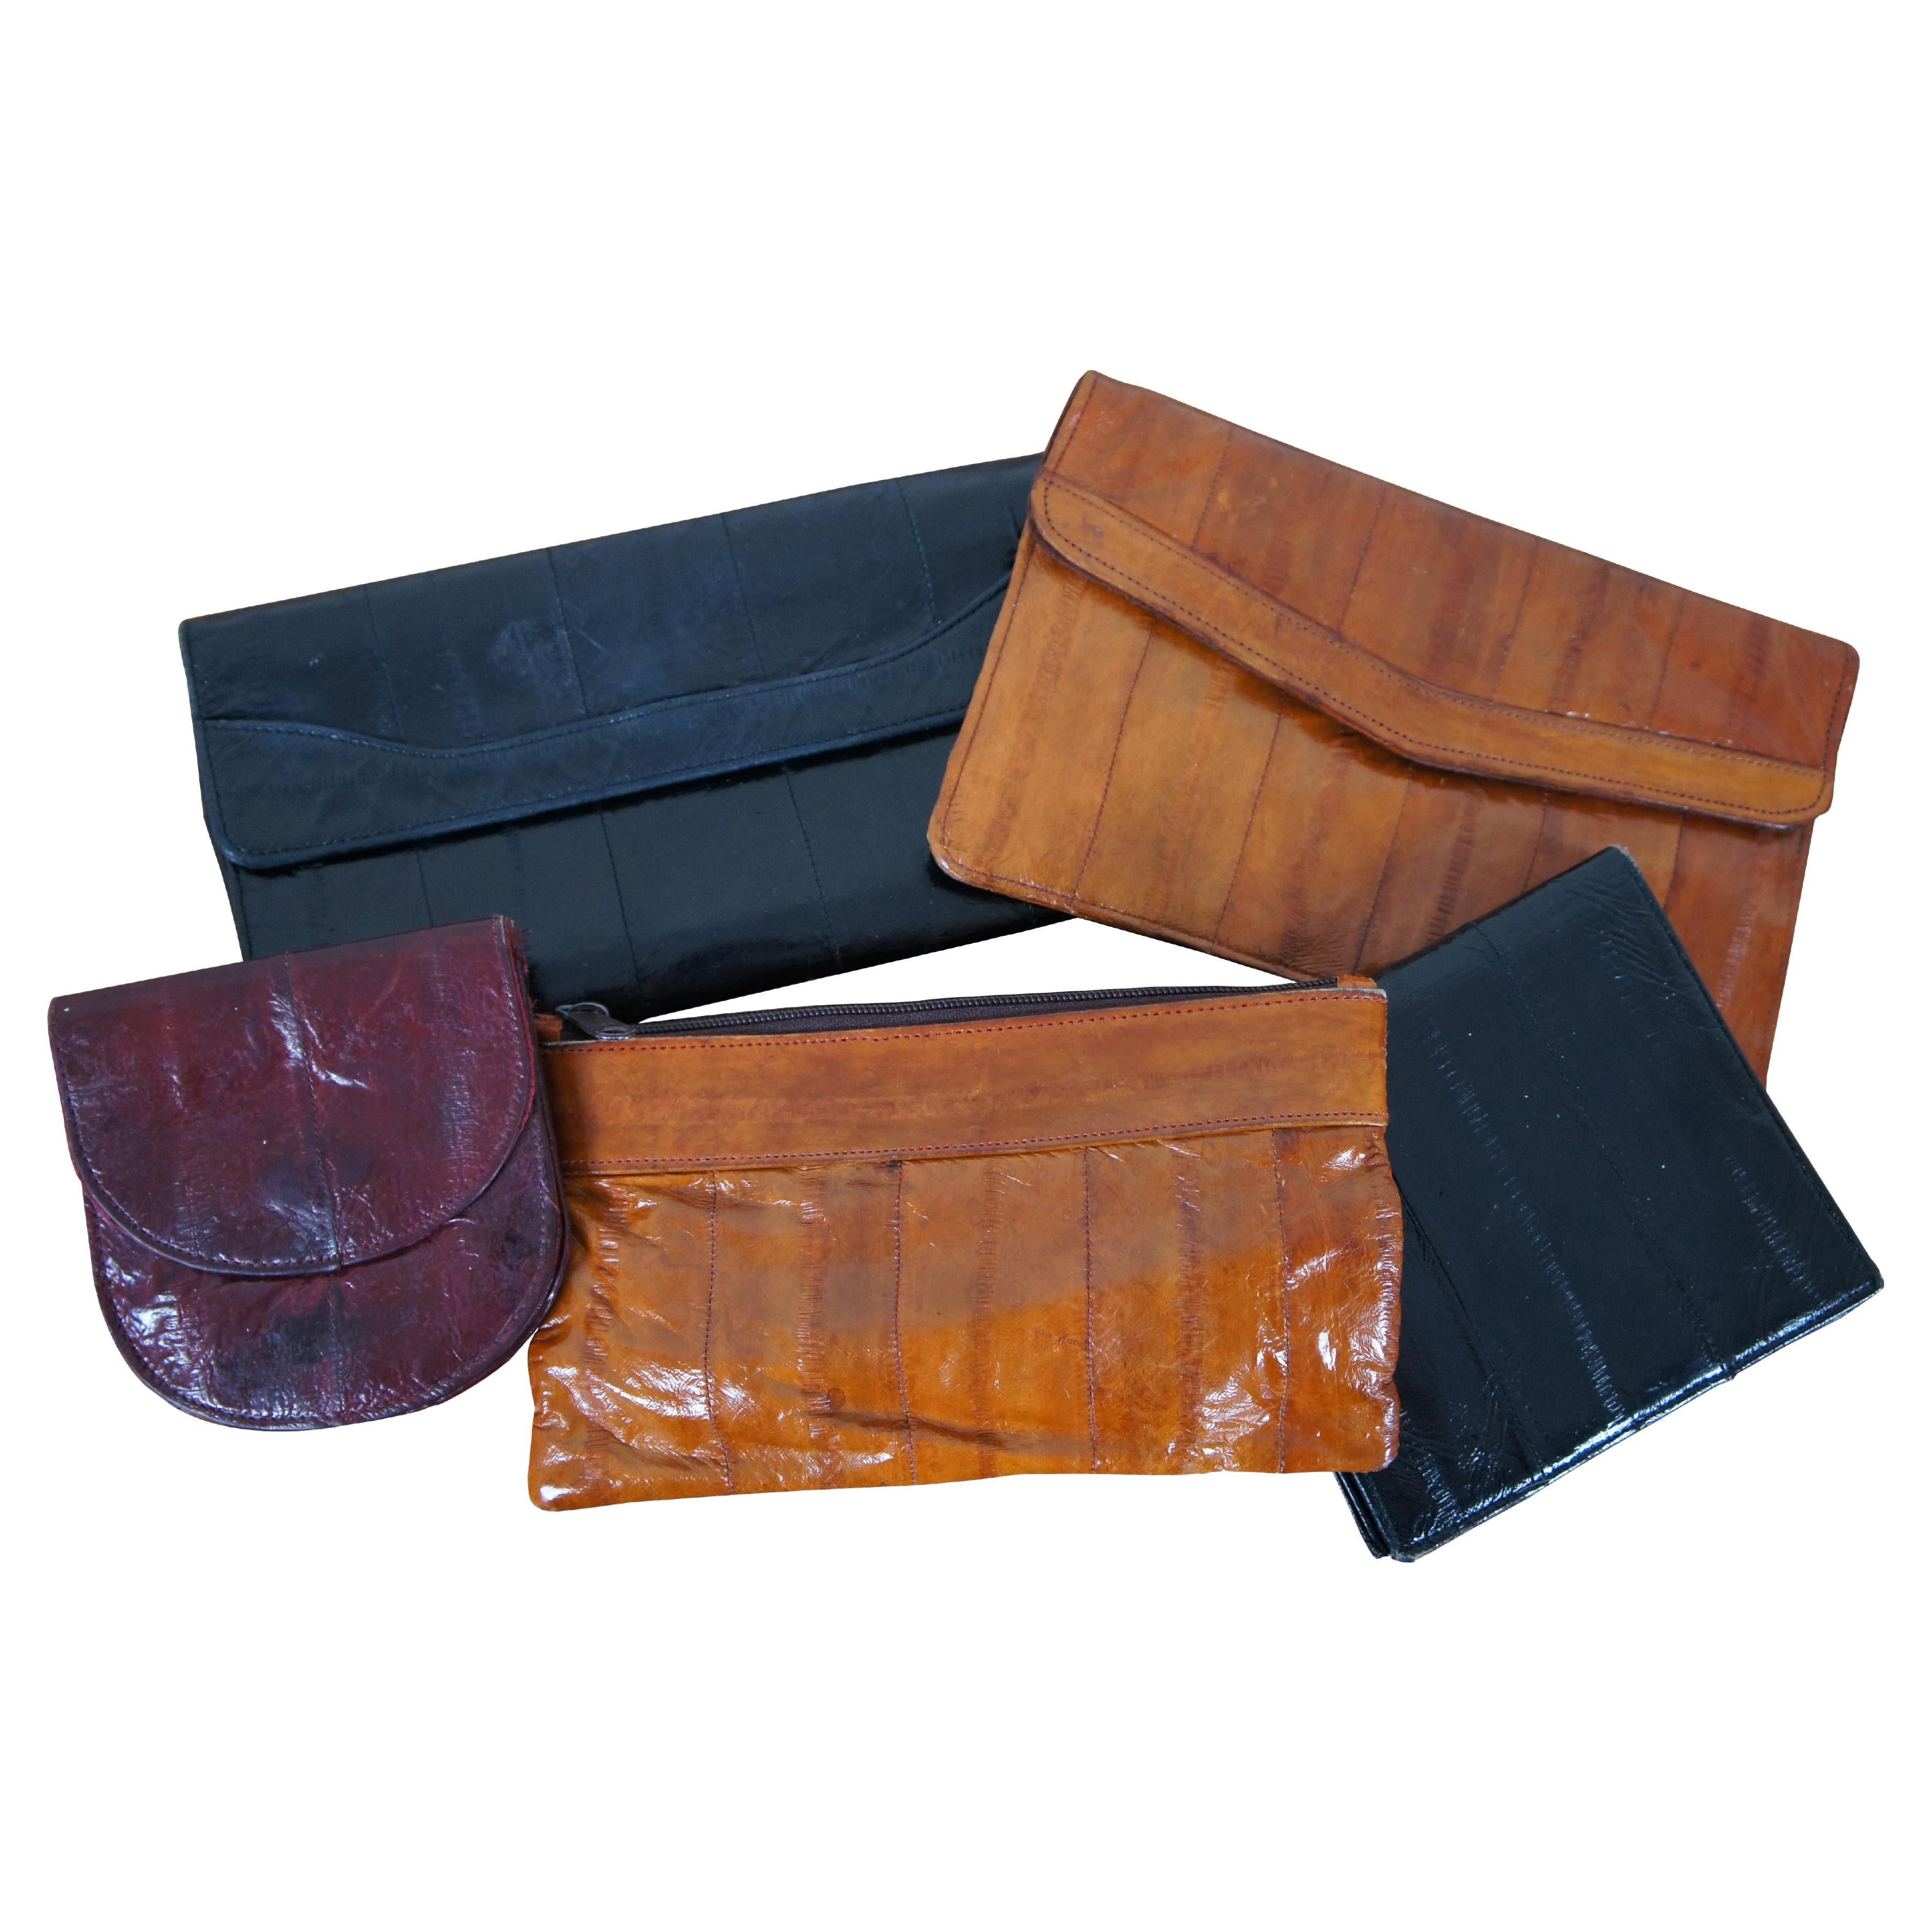 5 Vintage Eel Skin Soft Leather Clutch Coin Purses Billfold Wallet Pouch Bag For Sale